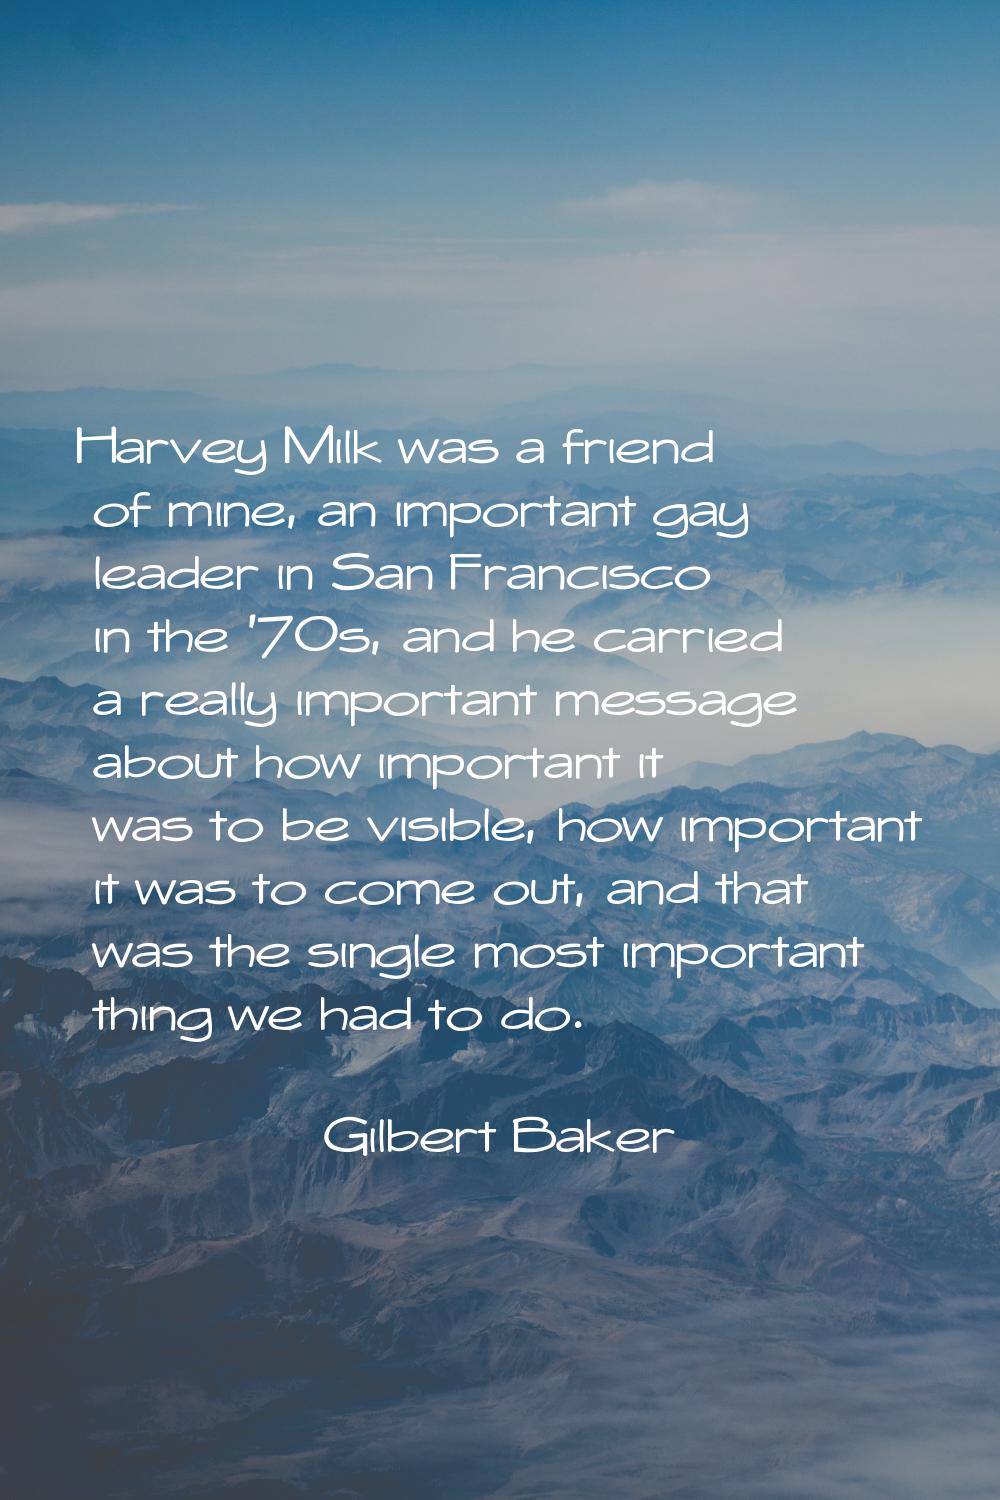 Harvey Milk was a friend of mine, an important gay leader in San Francisco in the '70s, and he carr